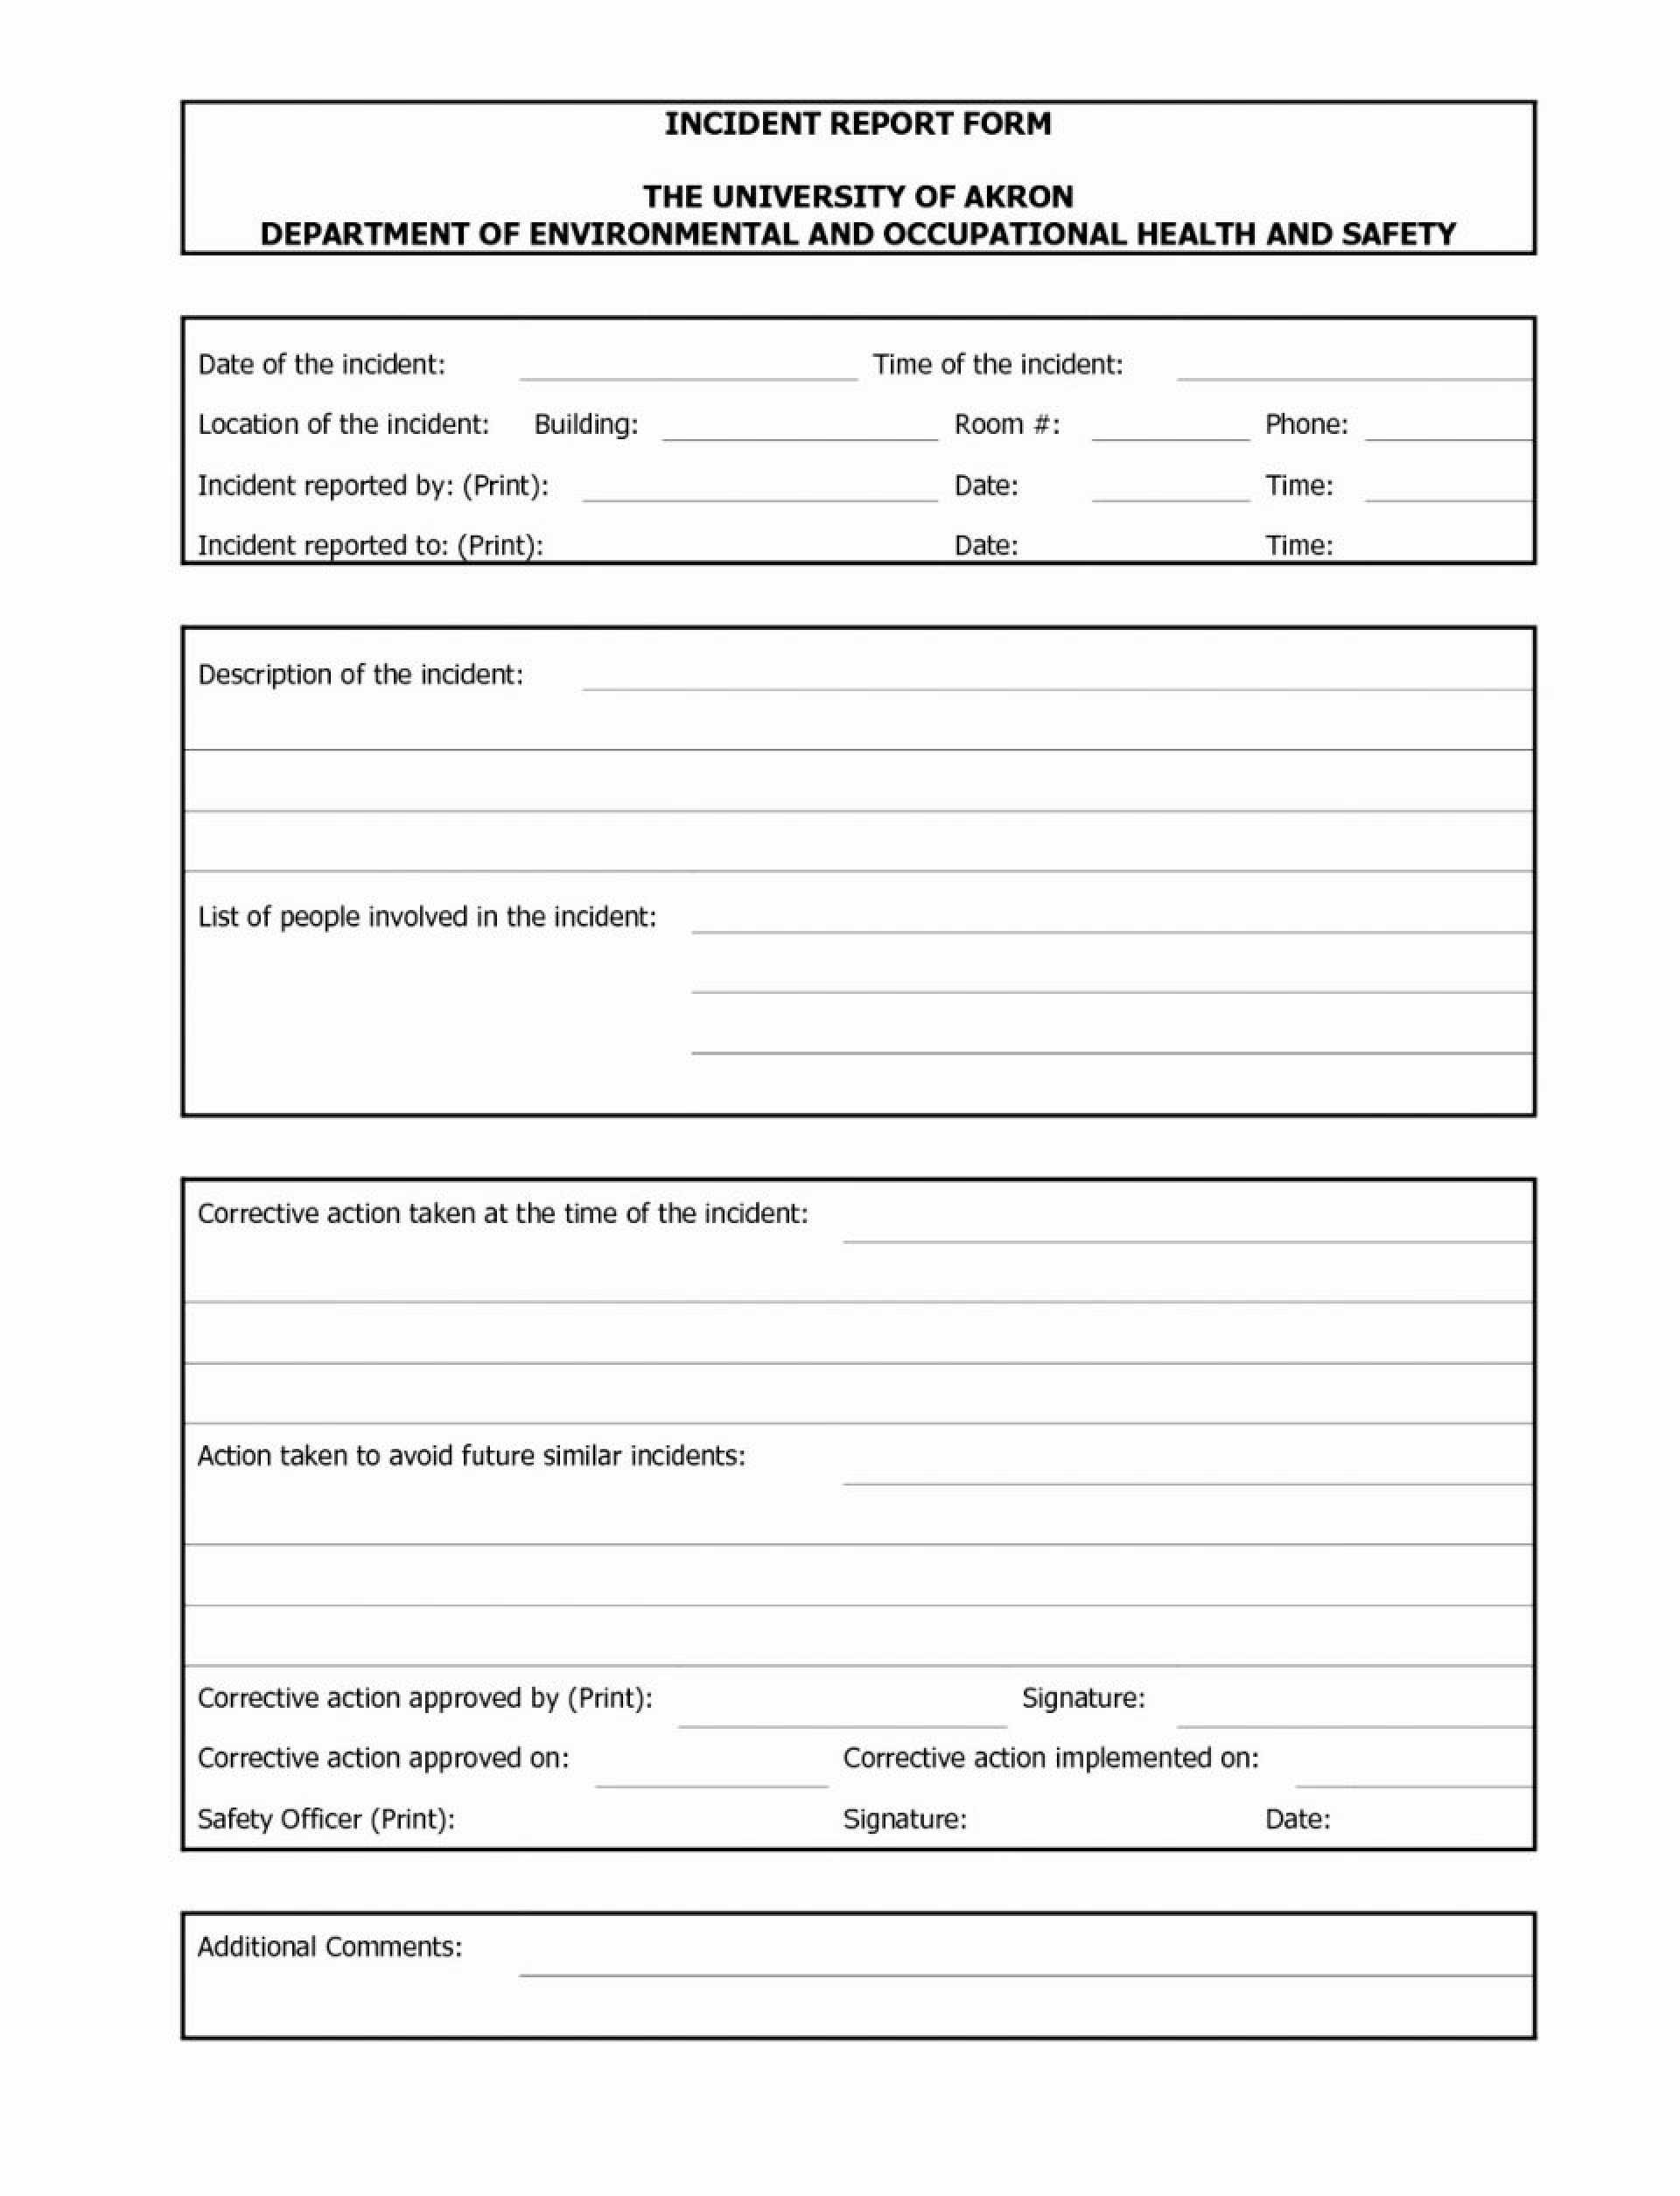 028 Incident Report Form Word Format Vehicle Accident For Health And Safety Incident Report Form Template